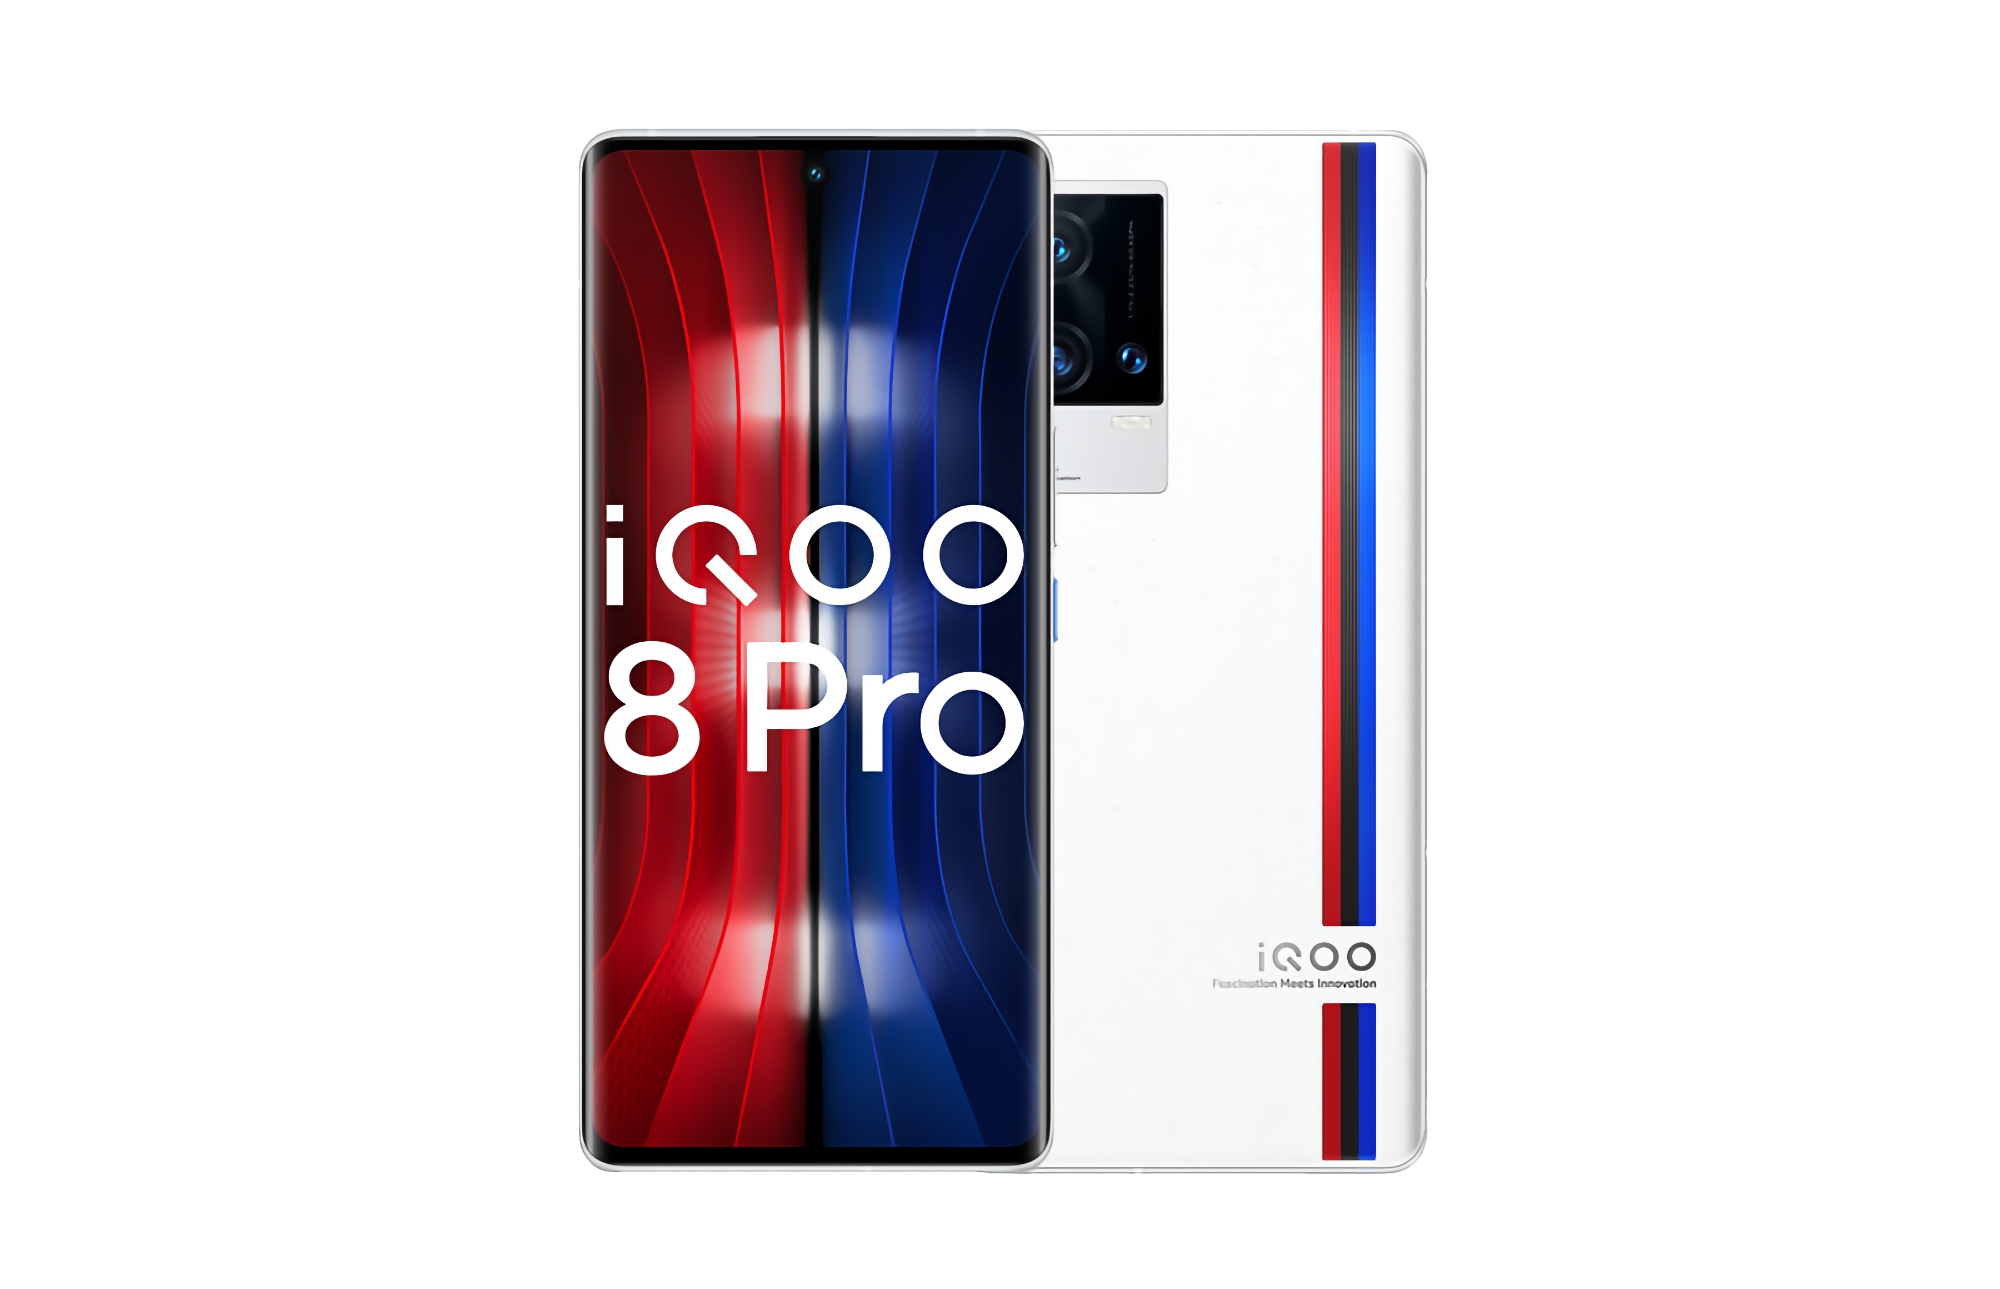 DisplayMate: The iQOO 8 Pro has the best screen among smartphones on the market